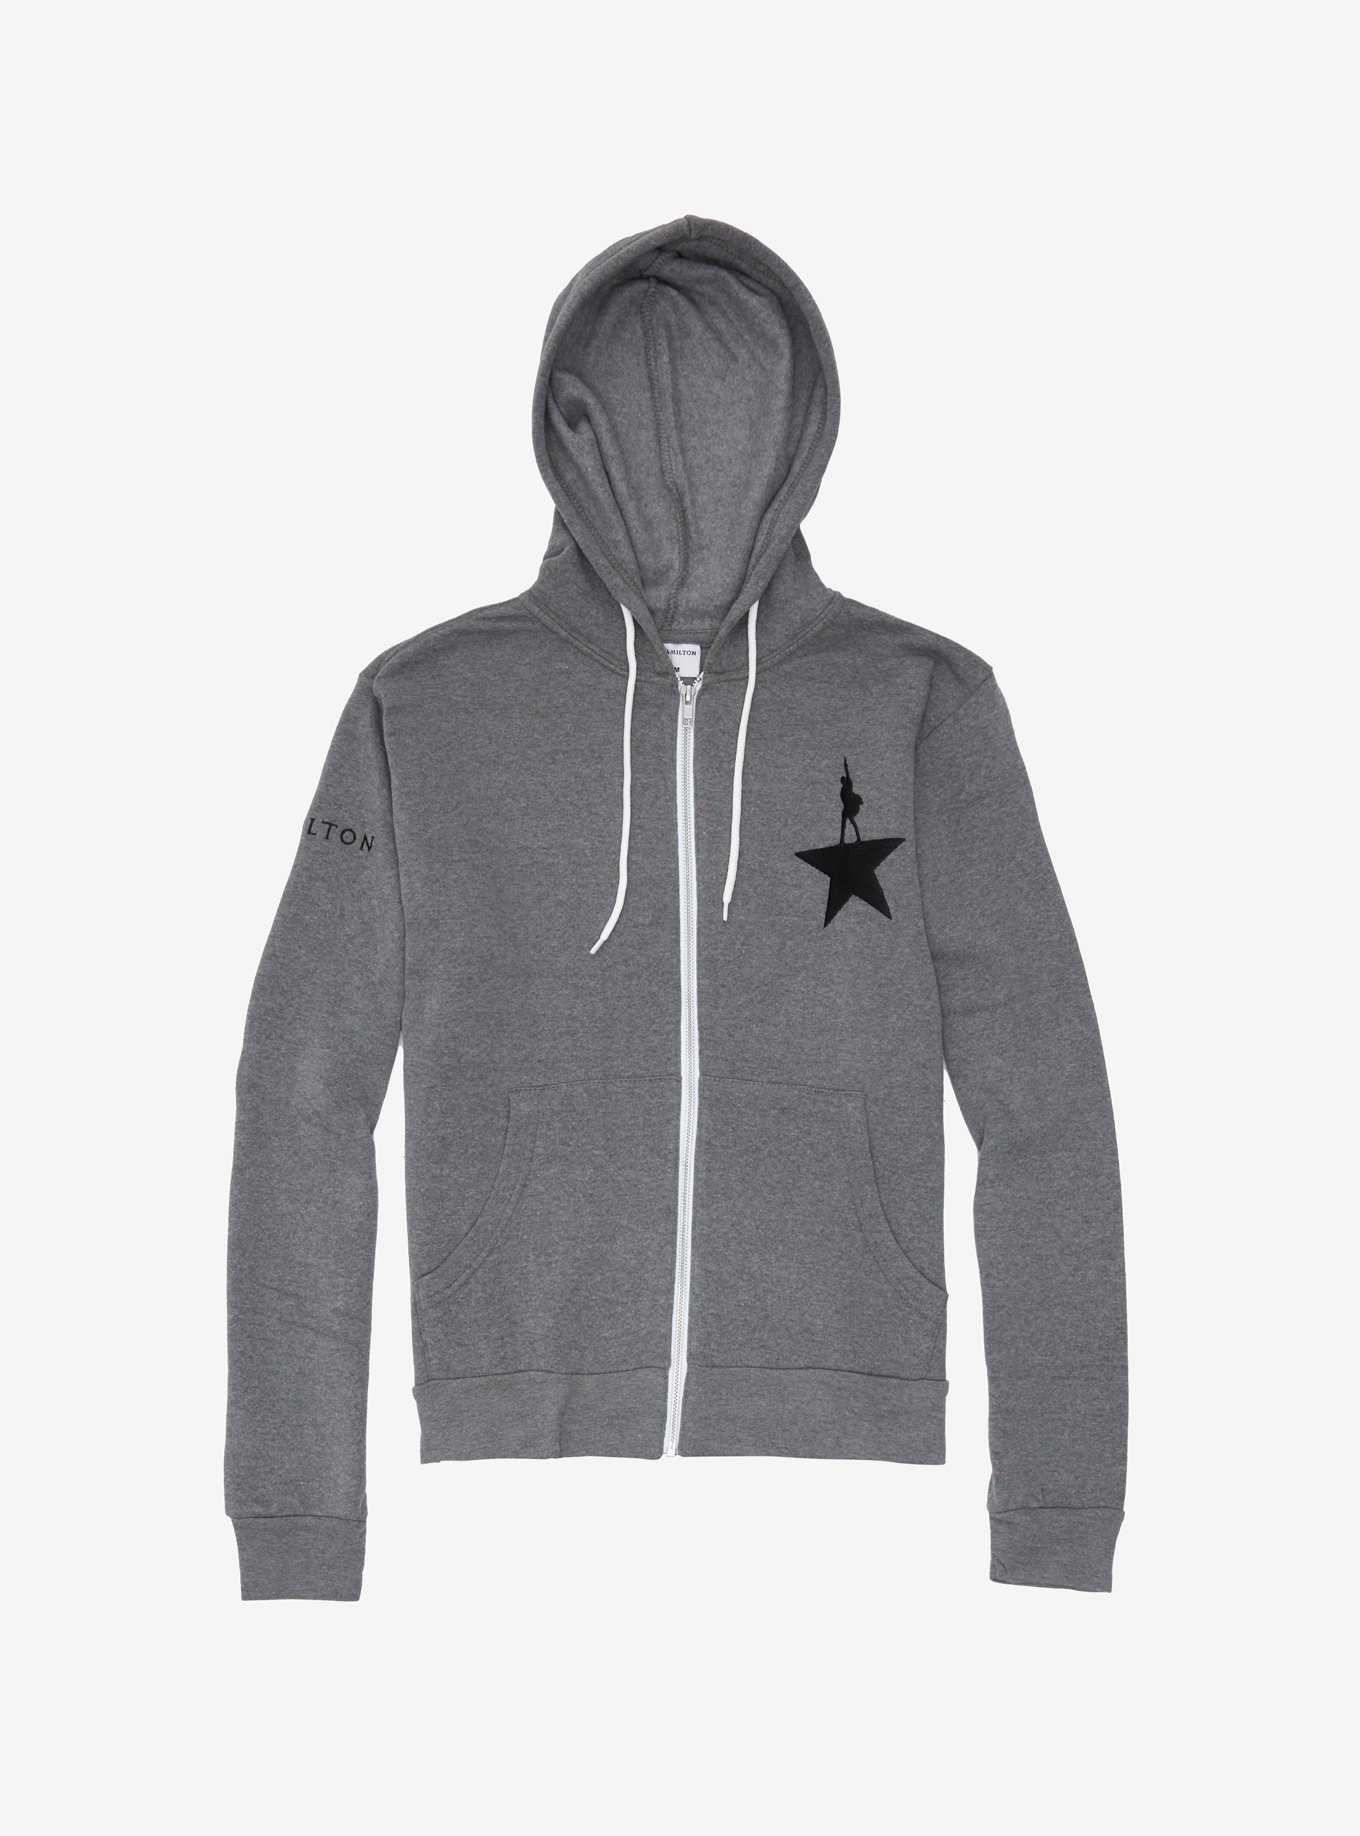 Hamilton Embroidered Hoodie, , hi-res